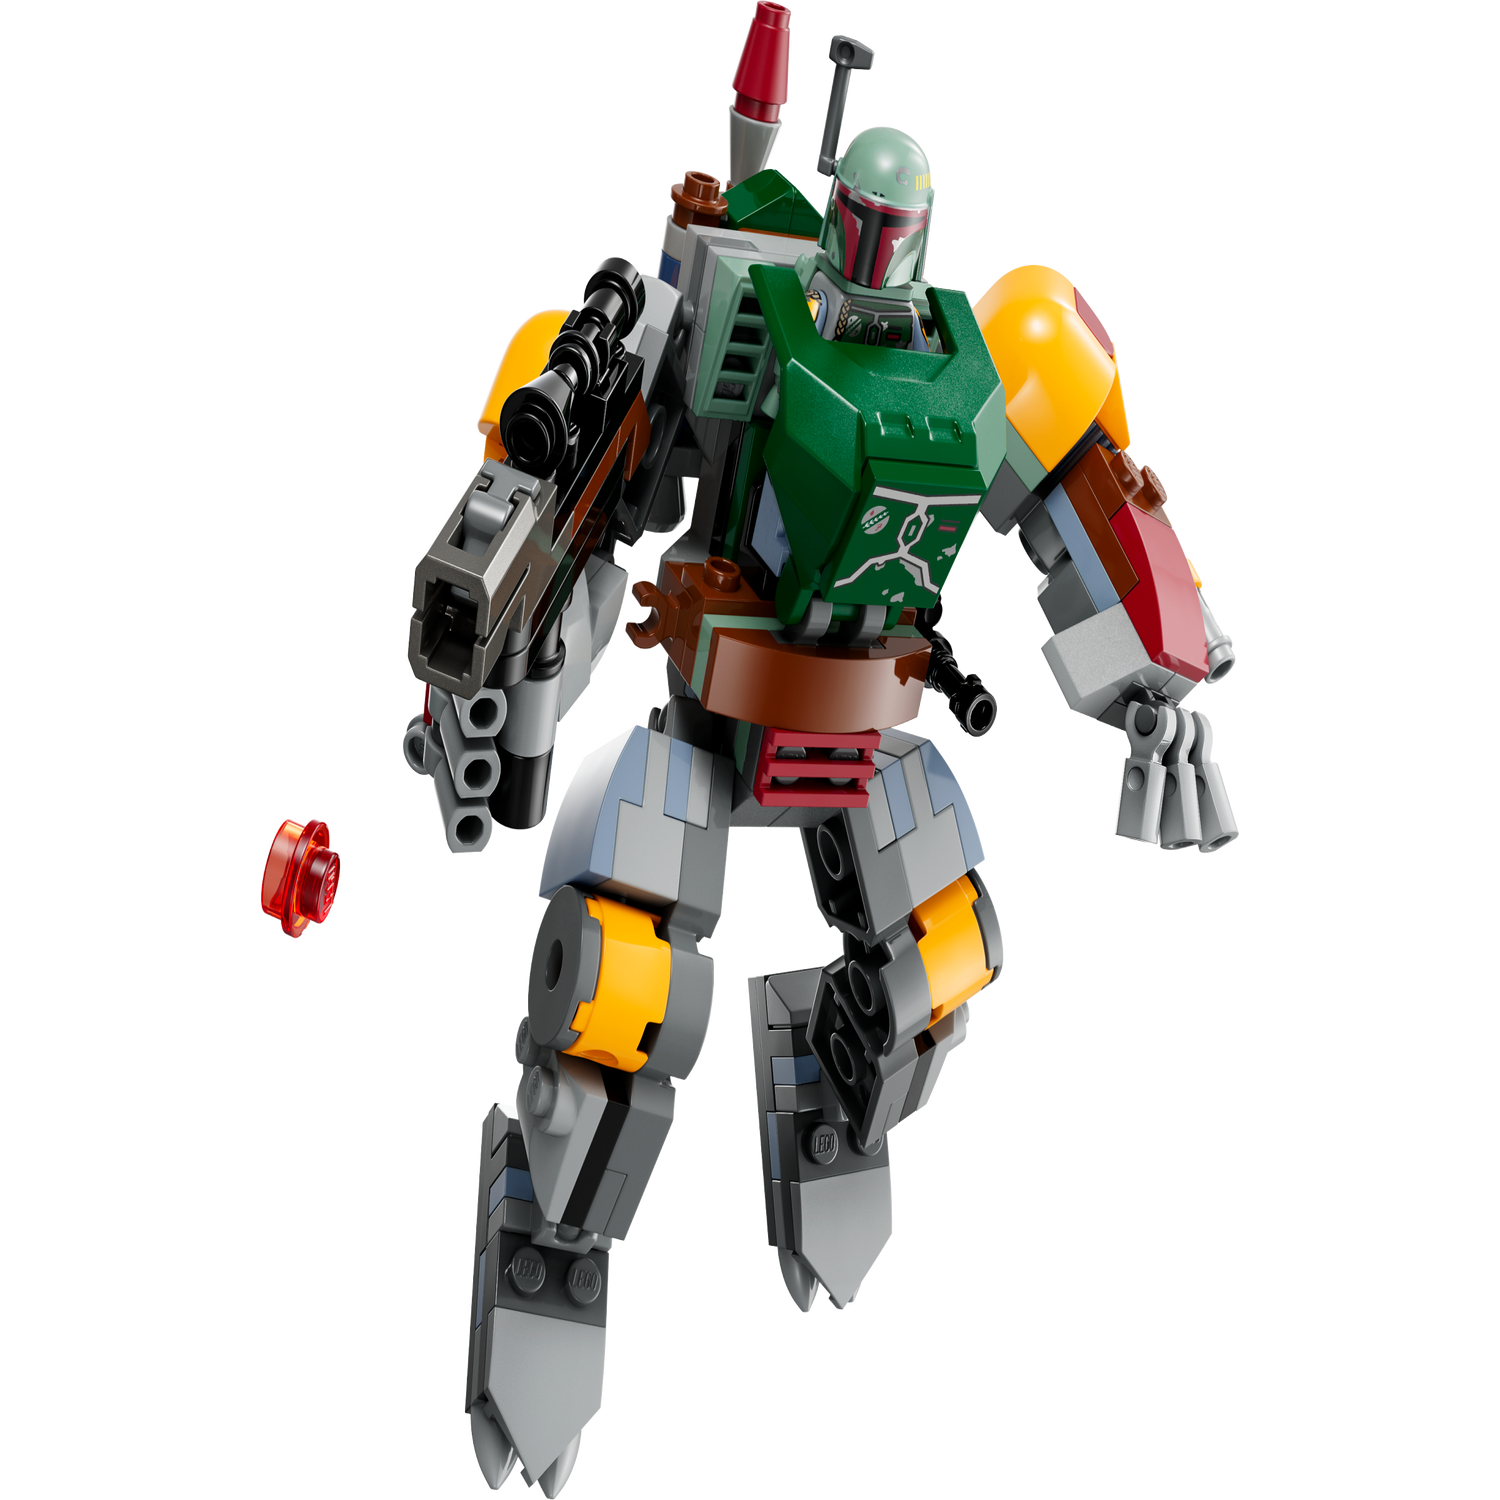 Boba Fett™ 75369 | Star Wars™ online at the Official LEGO® US